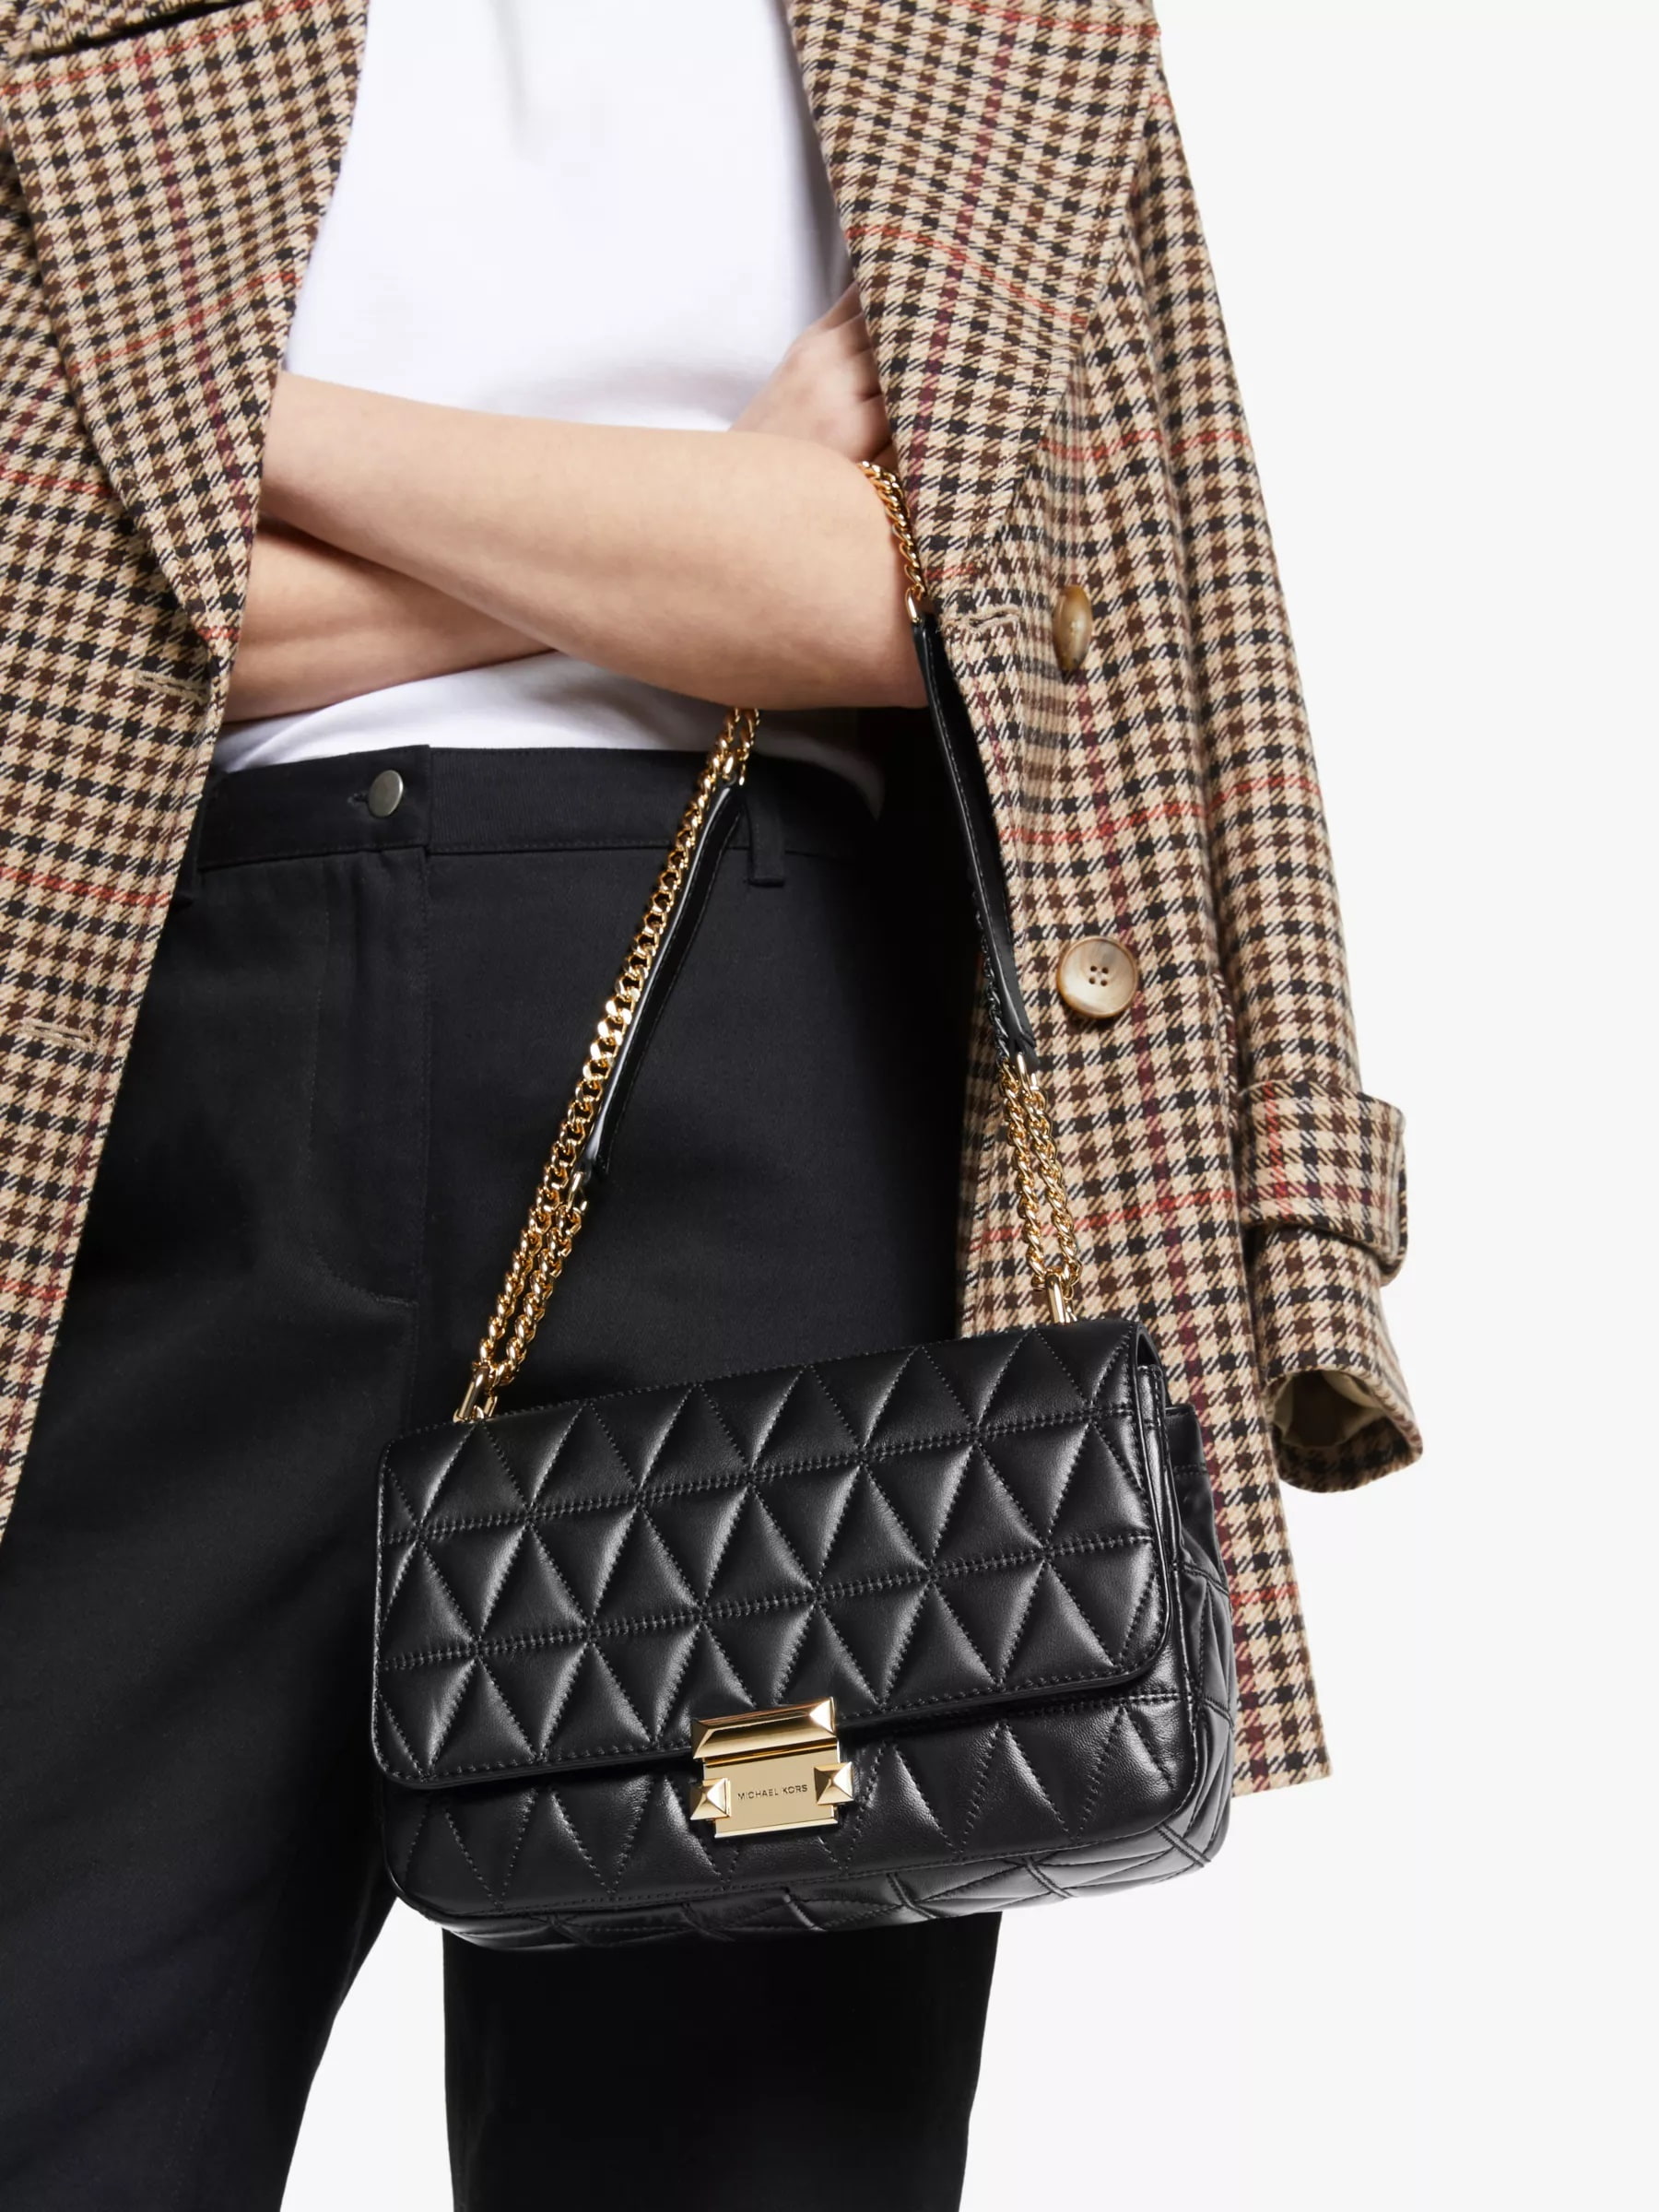 TÚI XÁCH NỮ MICHAEL KORS SLOAN LARGE QUILTED LEATHER SHOULDER BAG 7